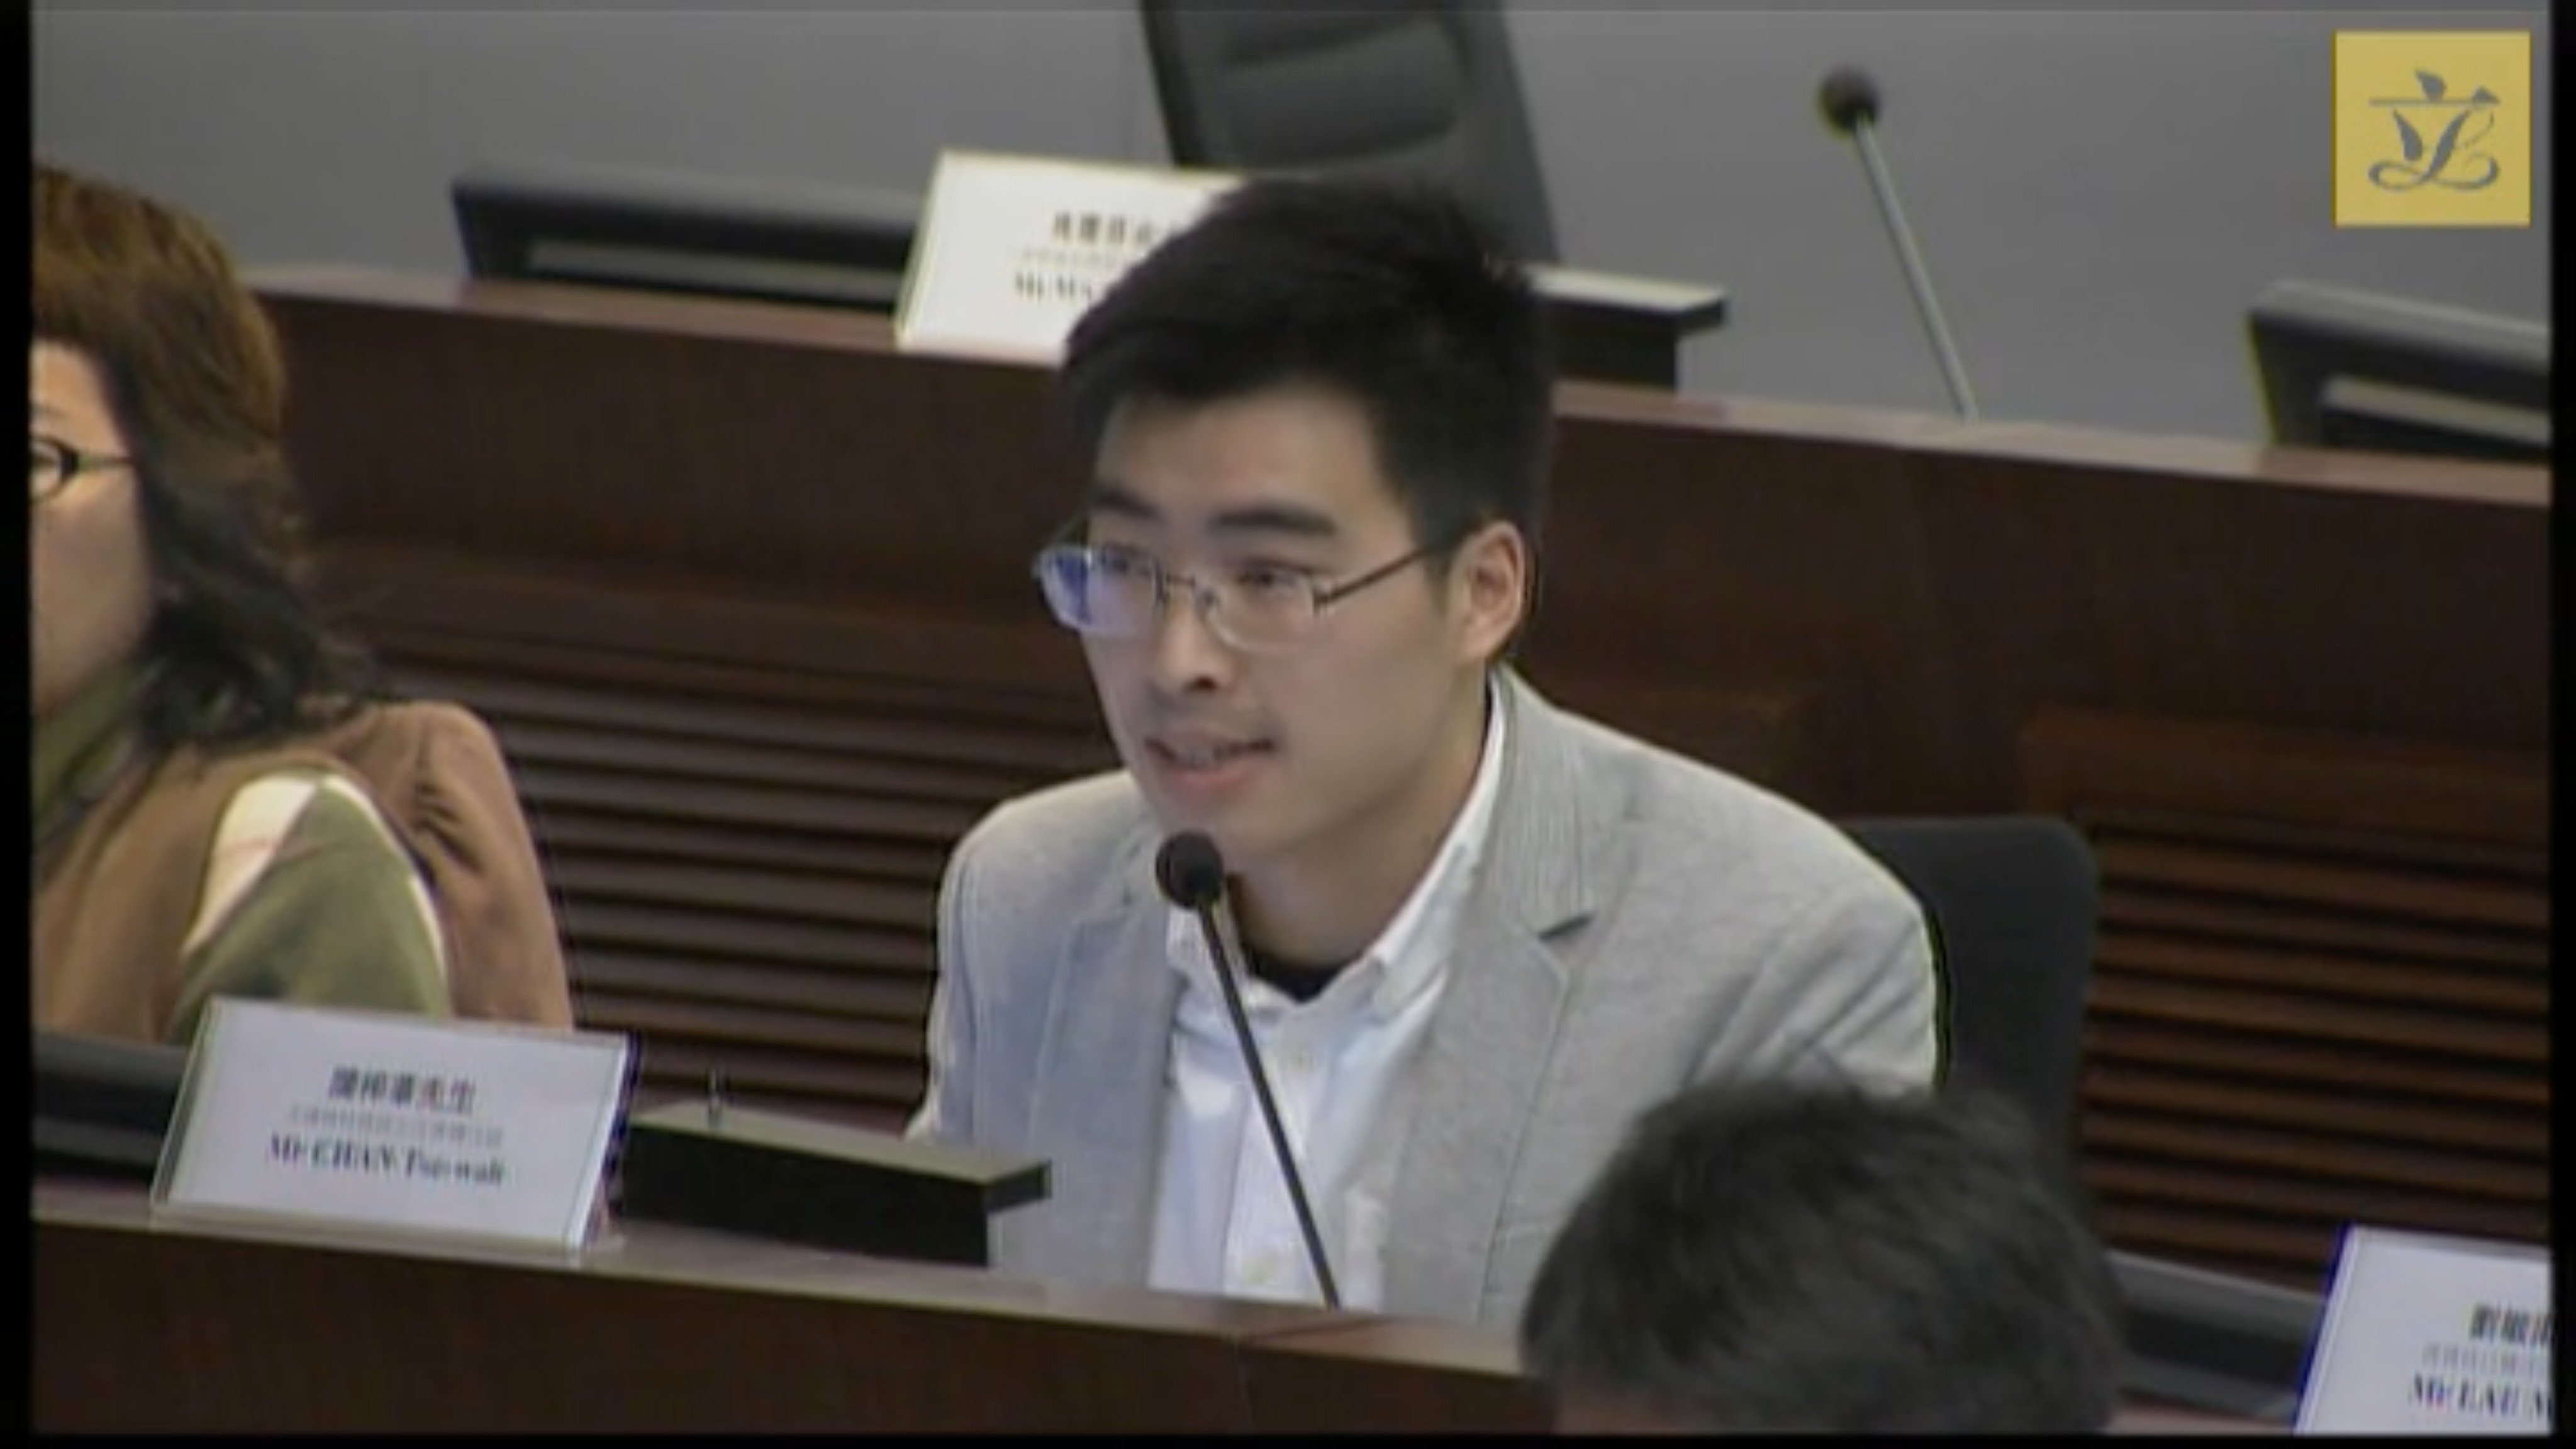 Wayland Chan is giving evidence for the prosecution in the trial of tycoon Jimmy Lai. Photo: Handout